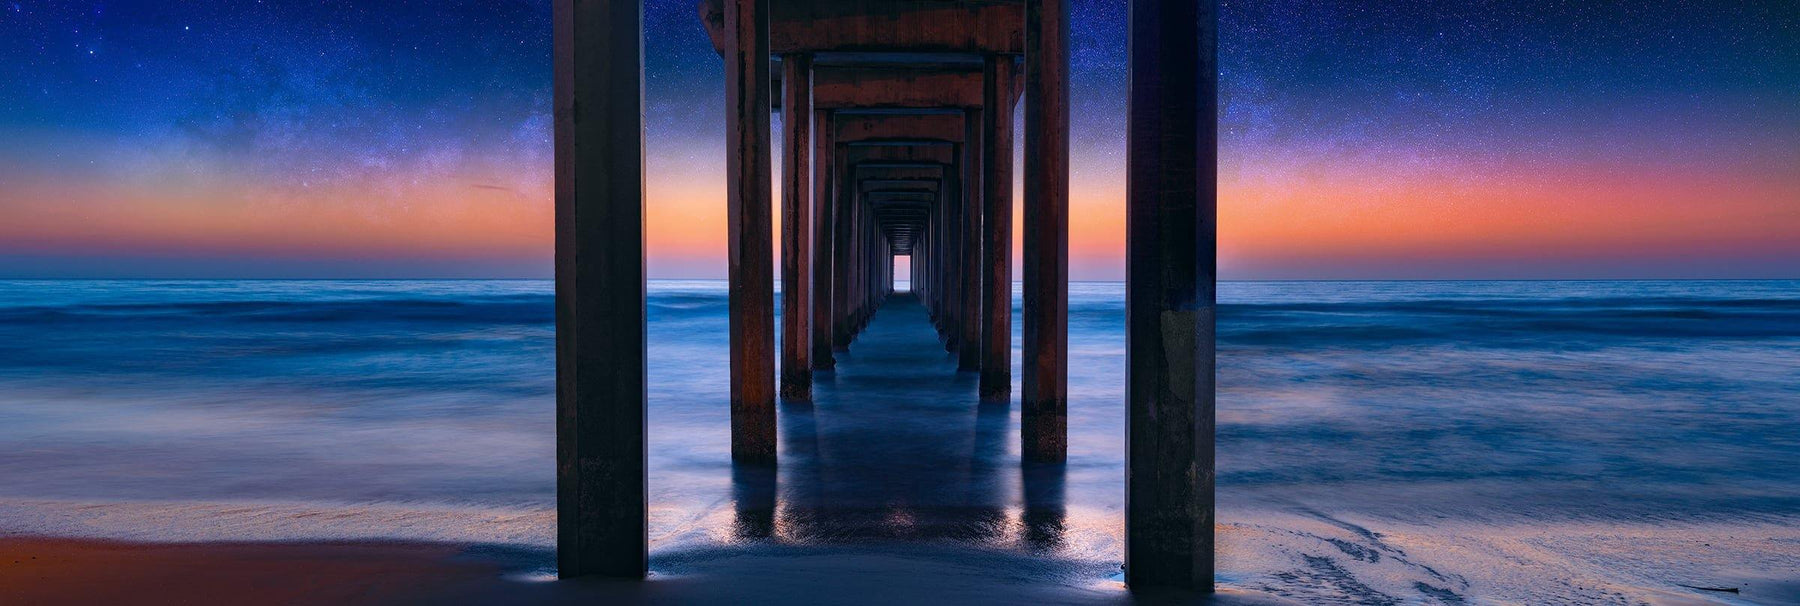 The ocean and Scripps Pier of La Jolla California with the glowing horizon and star filled sky in the background | LIK Fine Art